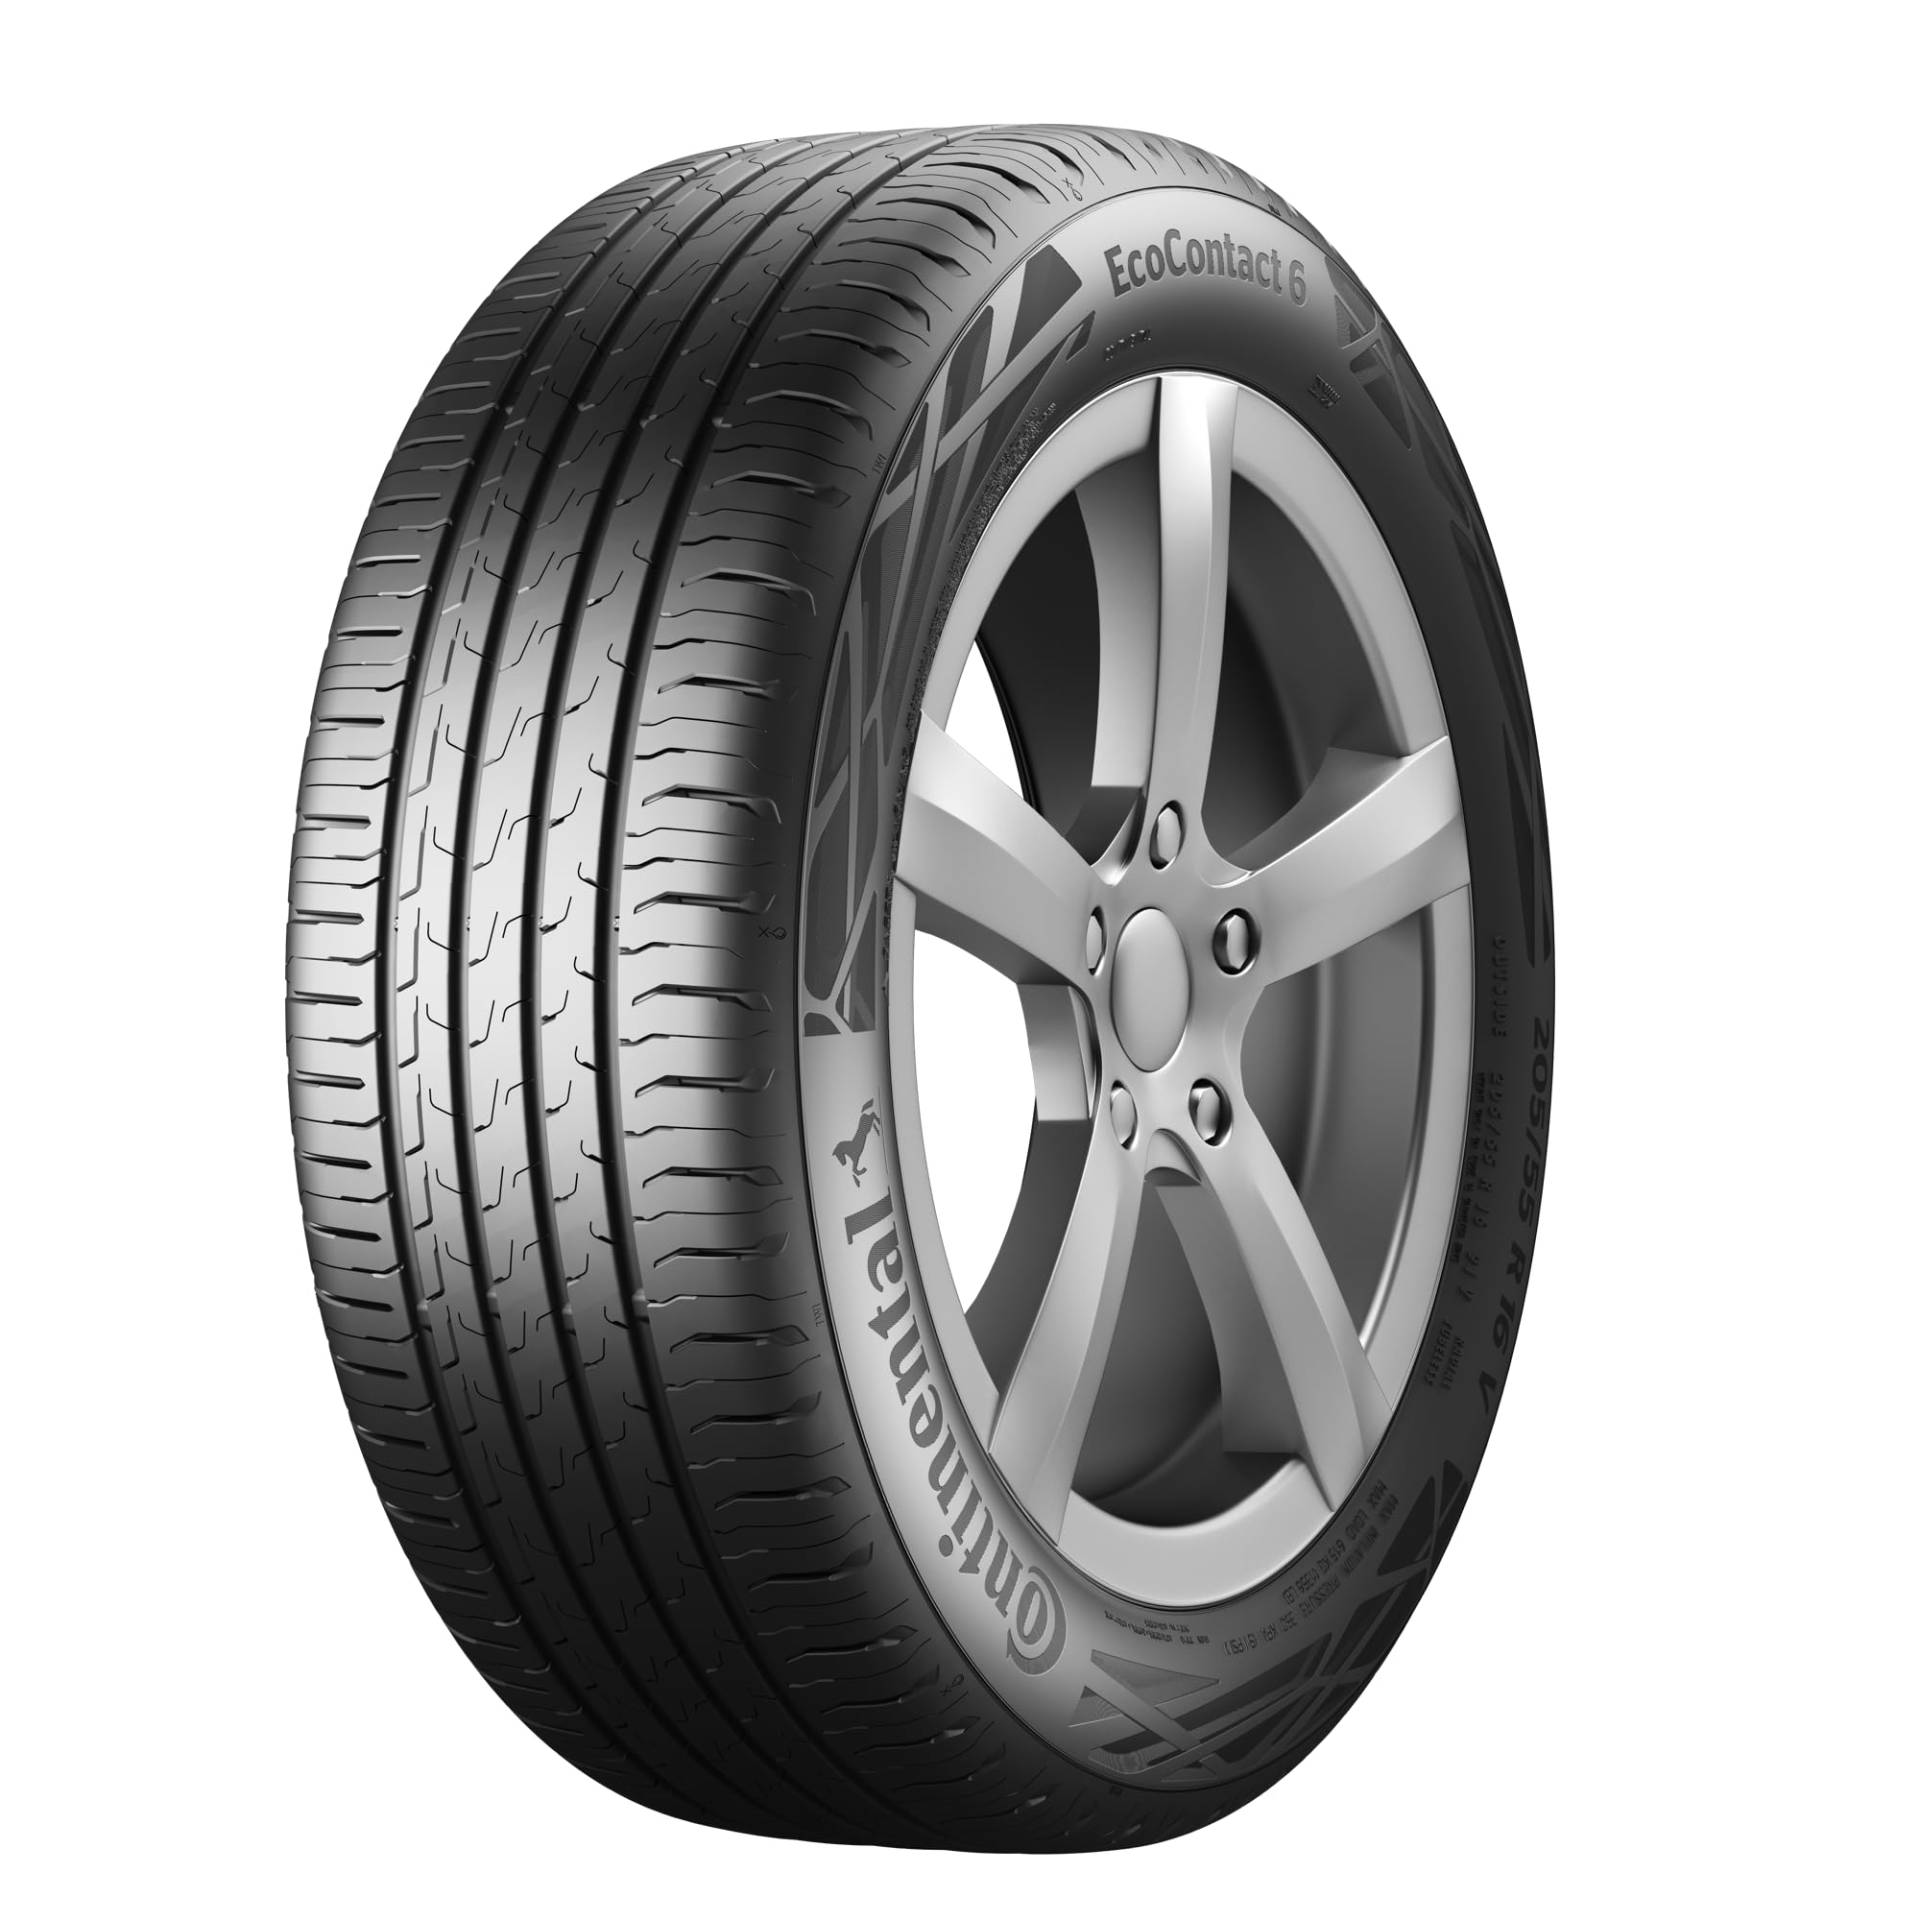 CONTINENTAL ECOCONTACT 6 - 205/55R16 91V - A/A/71dB - Sommerreifen von Continental